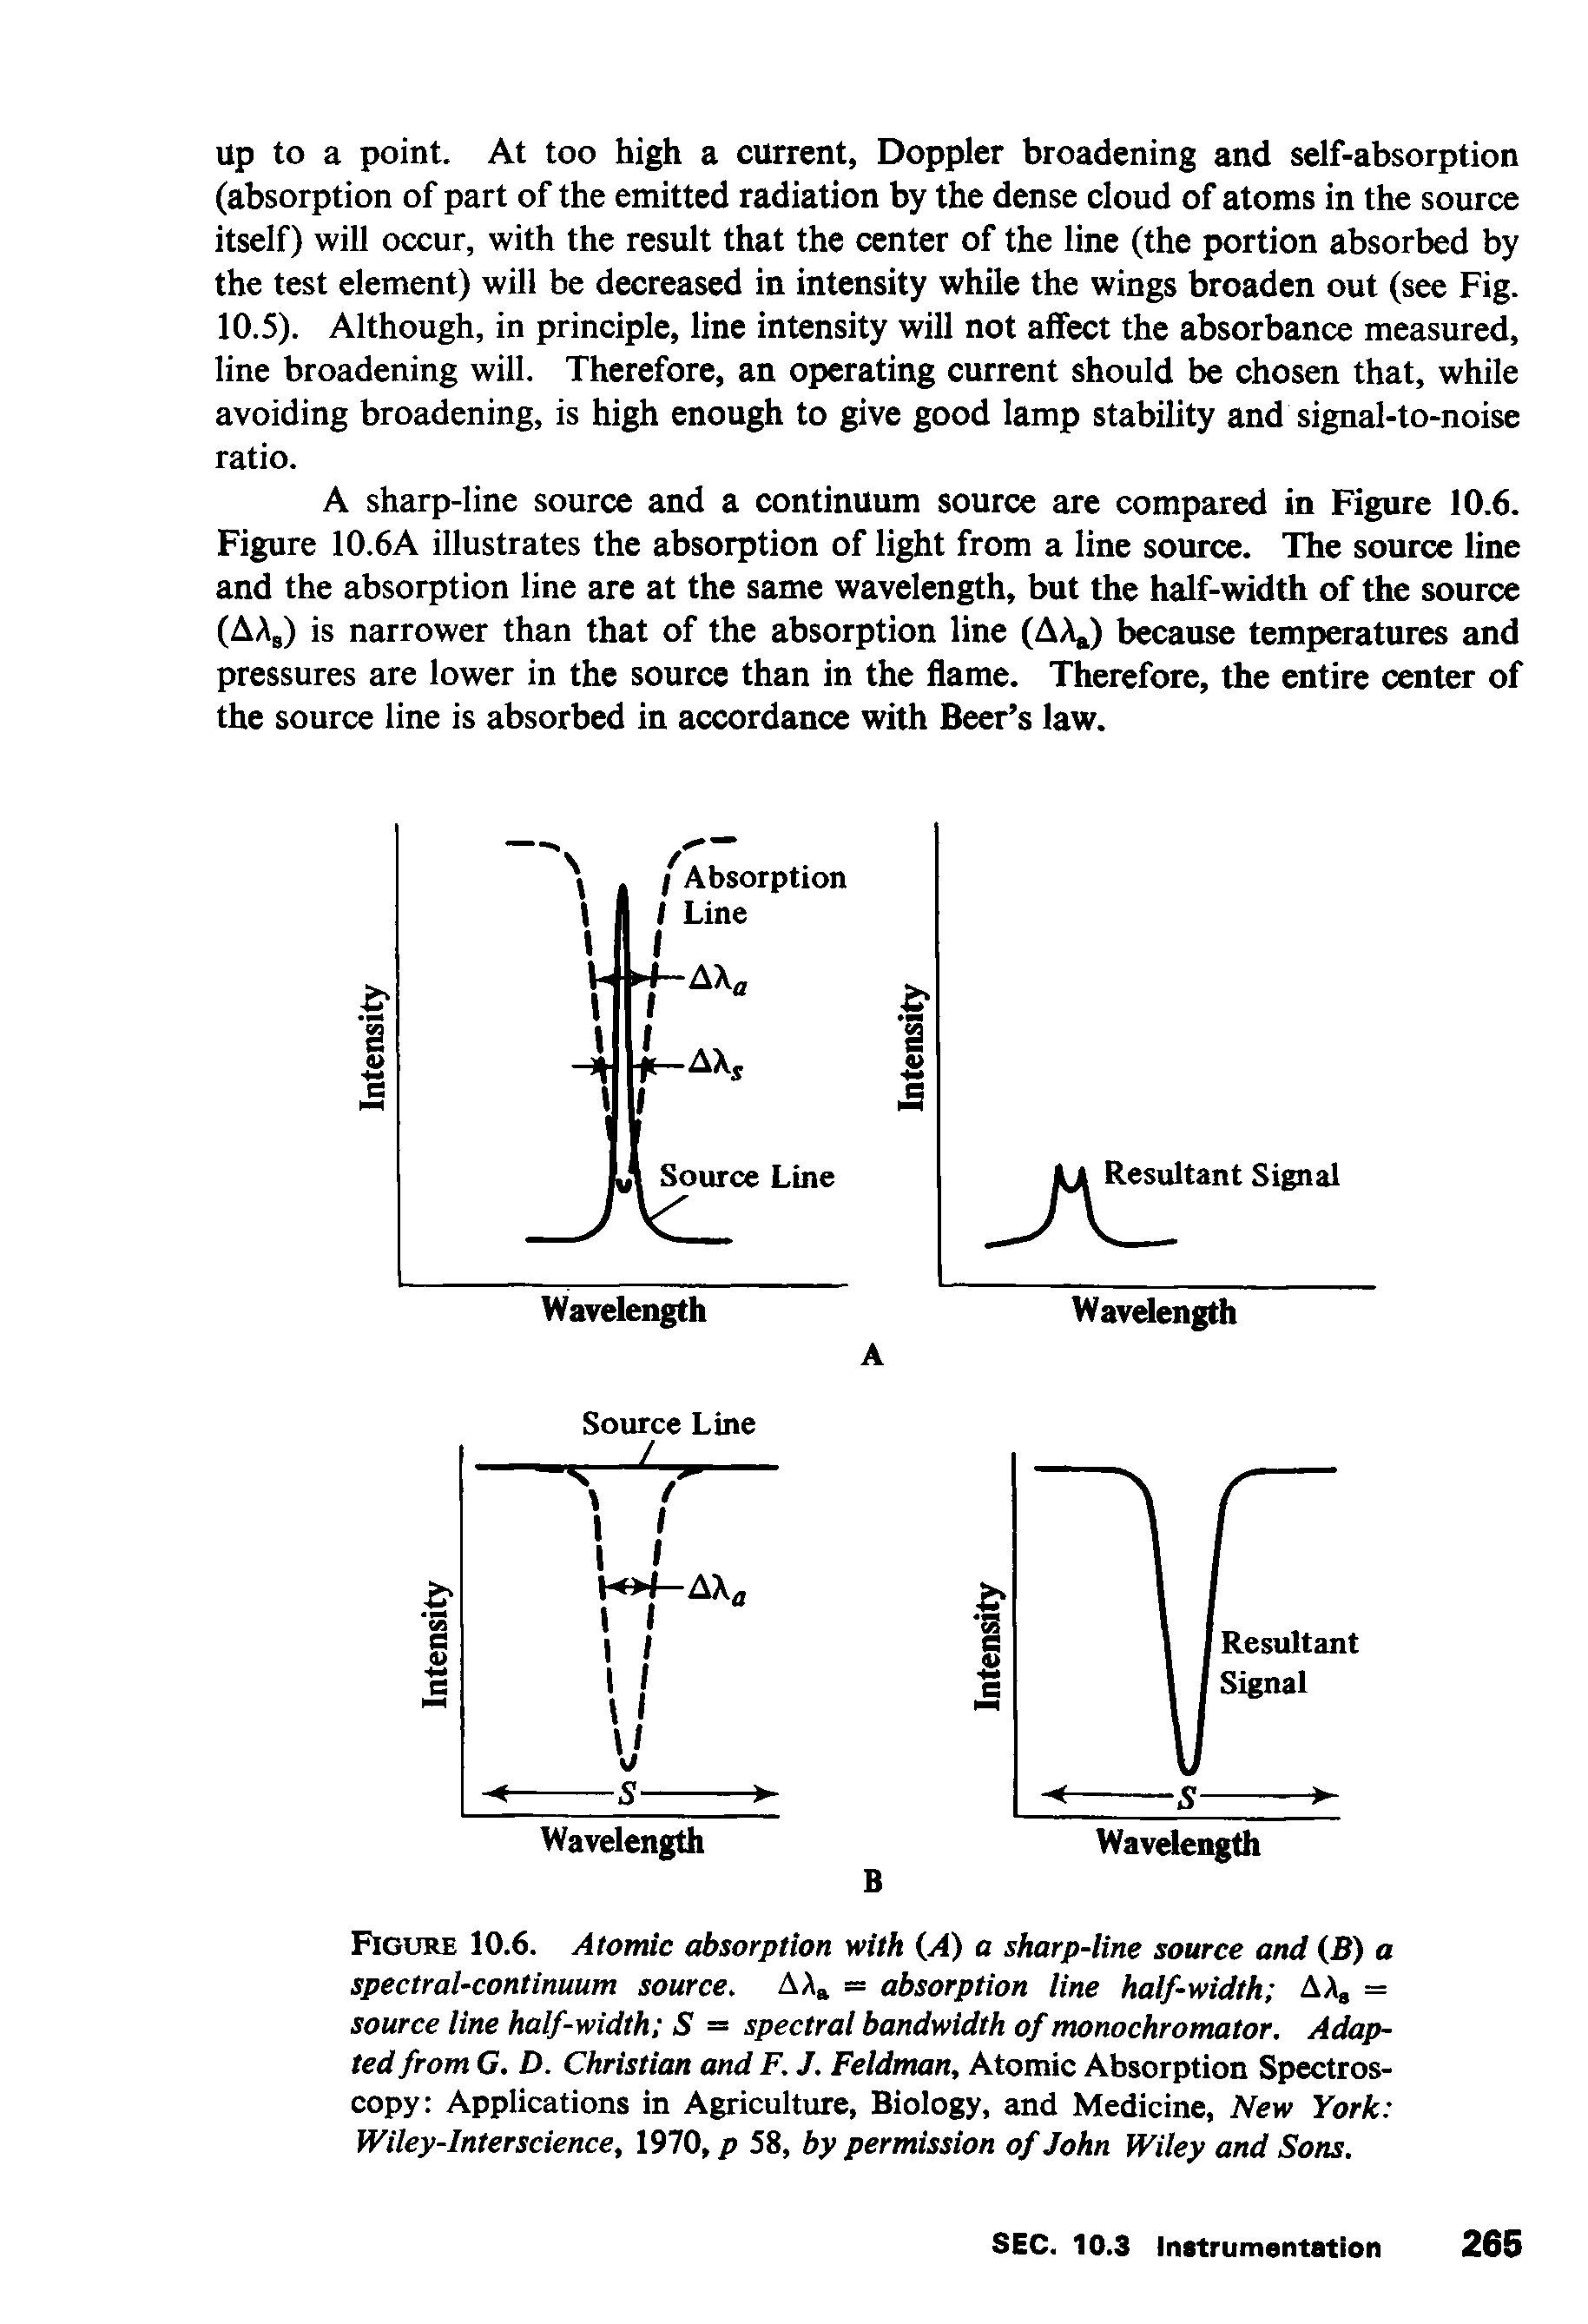 Figure 10.6. Atomic absorption with A) a sharp-line source and (B) a spectral-continuum source. AA = absorption line half-width AA, = source line half-width S = spectral bandwidth of monochromator. Adapted from G. D. Christian and F. J. Feldman, Atomic Absorption Spectroscopy Applications in Agriculture, Biology, and Medicine, New York Wiley-Interscience, 1970, p 58, by permission of John Wiley and Sons.